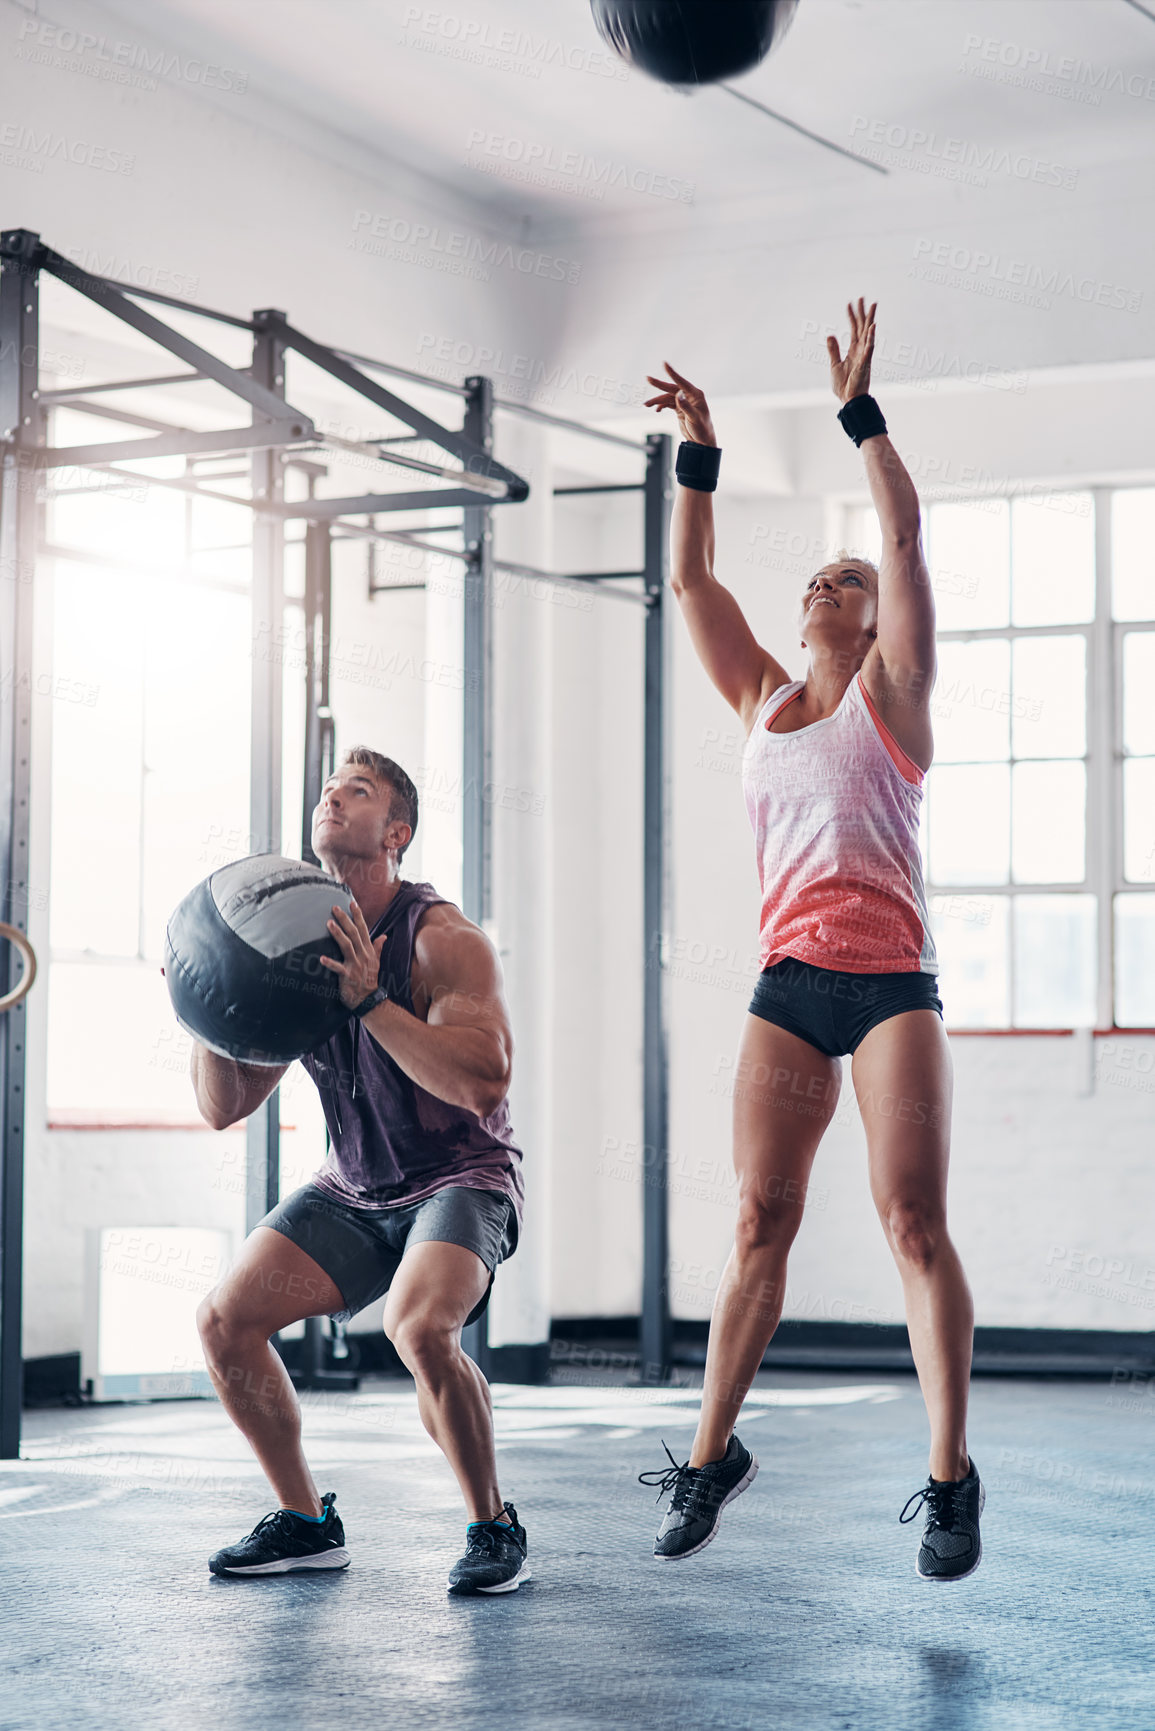 Buy stock photo Shot of two sporty young people working out with medicine balls at the gym